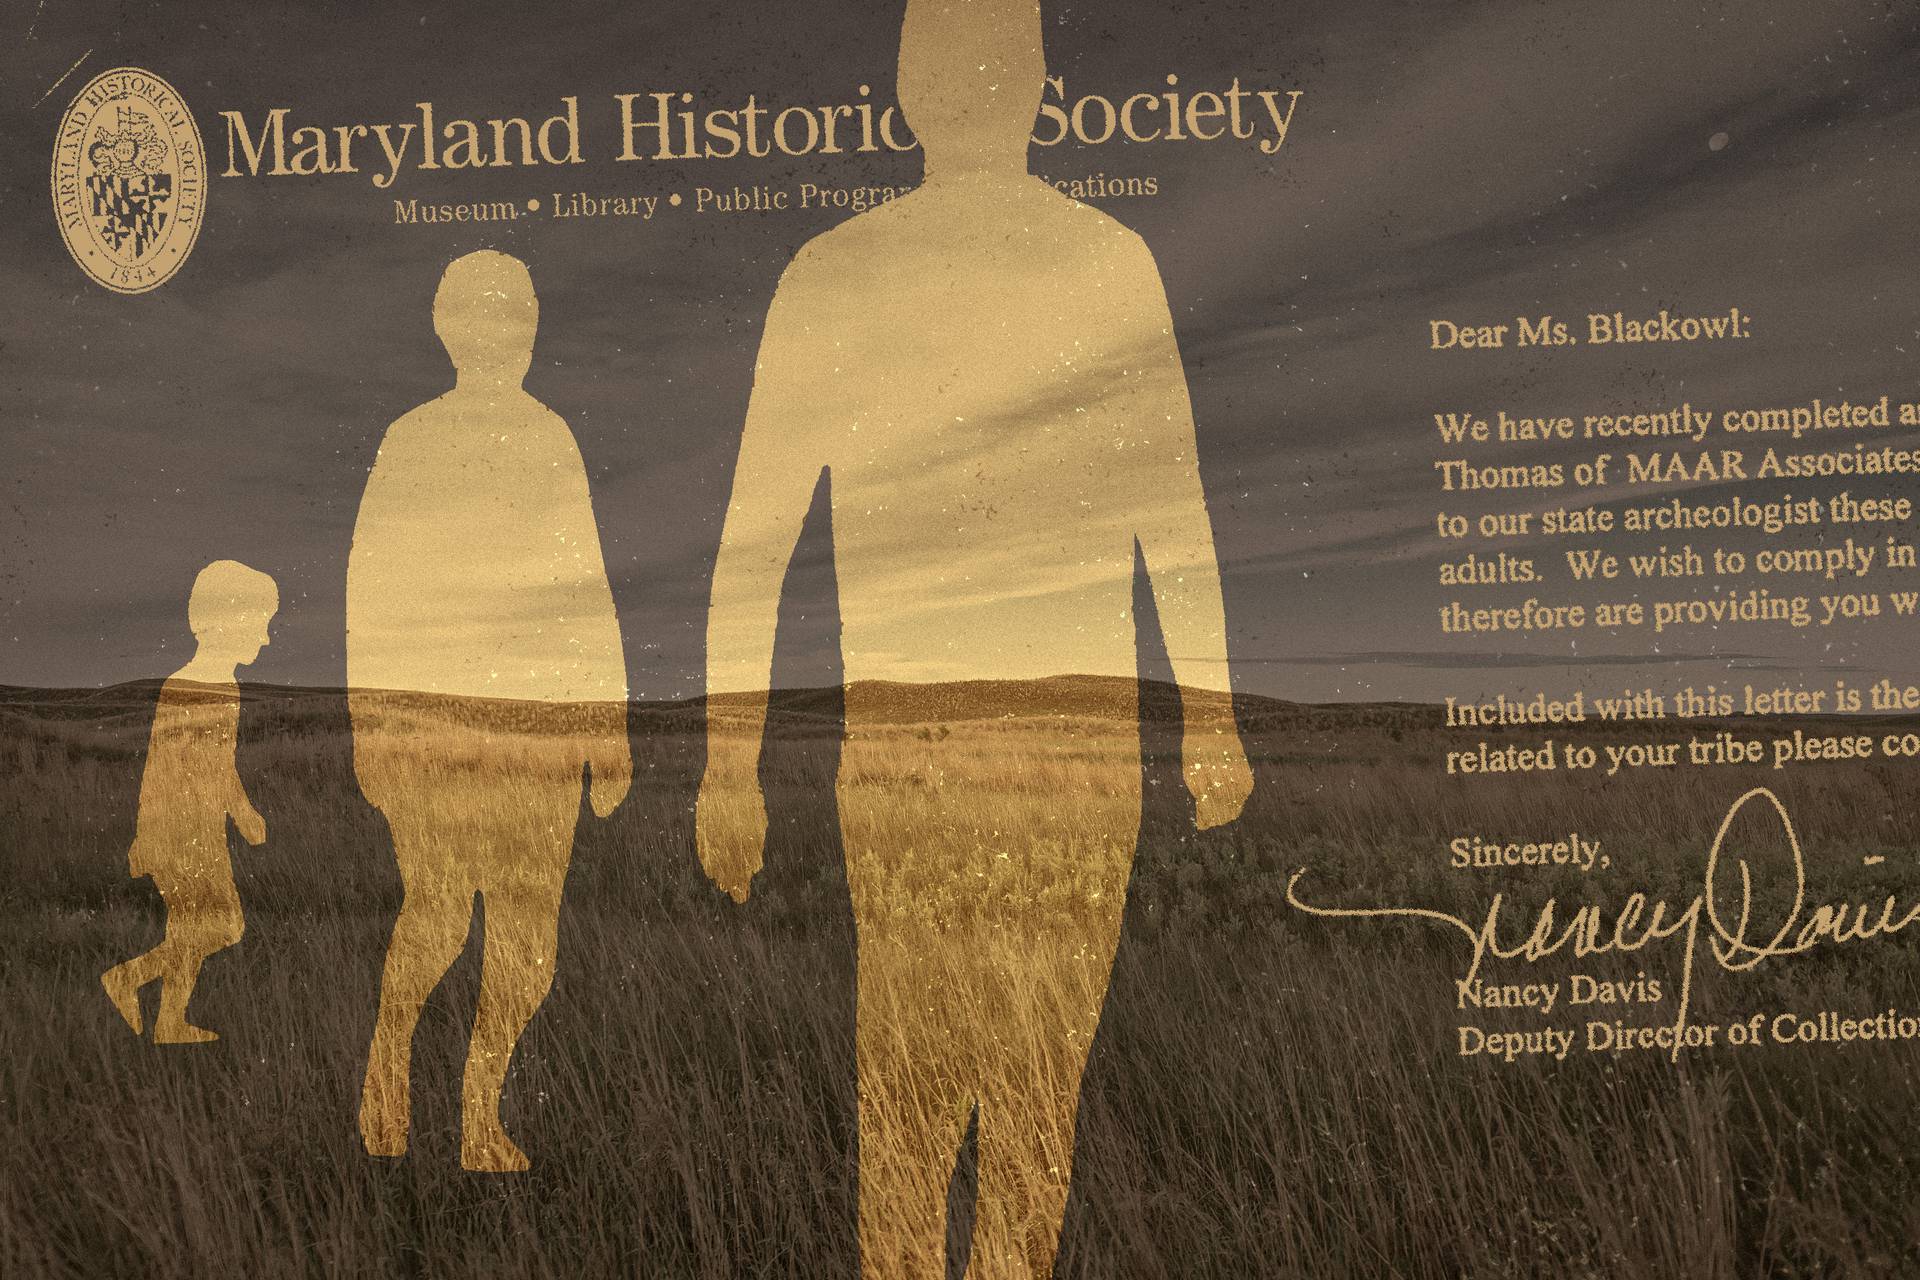 Photo collage showing silhouettes of two adults and a child walking over prairie landscape, with excerpts from 1997 letter from Maryland Historical Society to the Pawnee Nation.